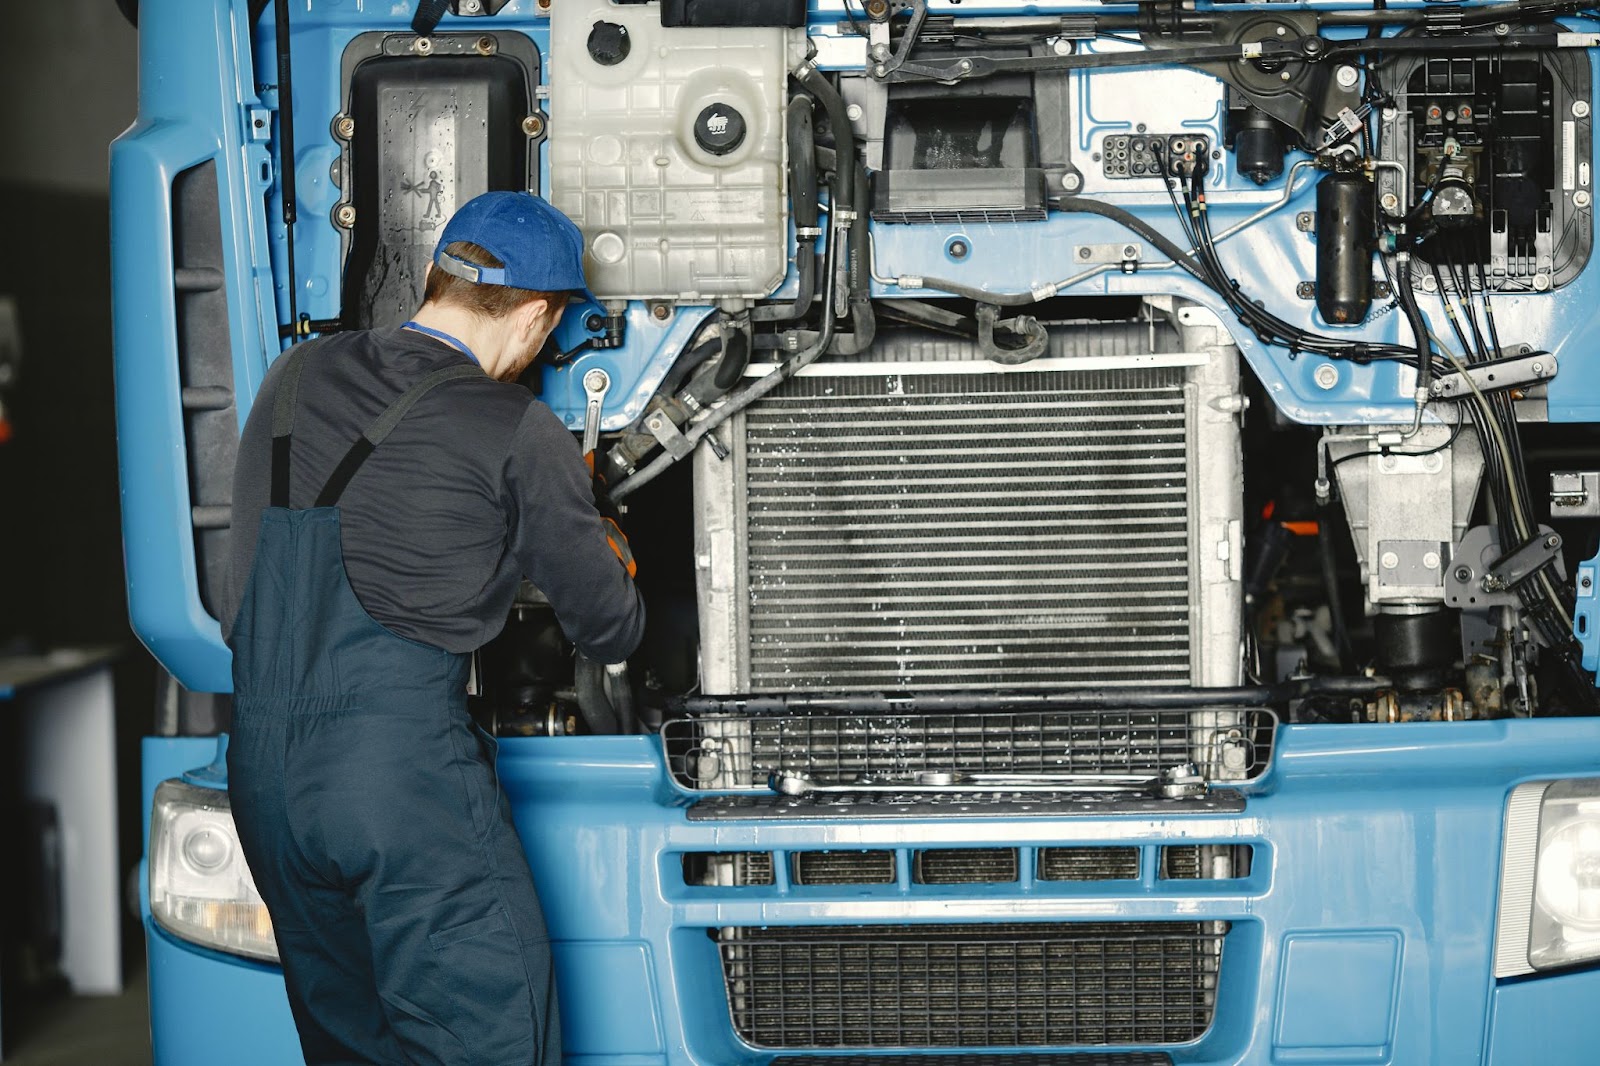 A repair mechanic working under the exposed engine of a semi-truck